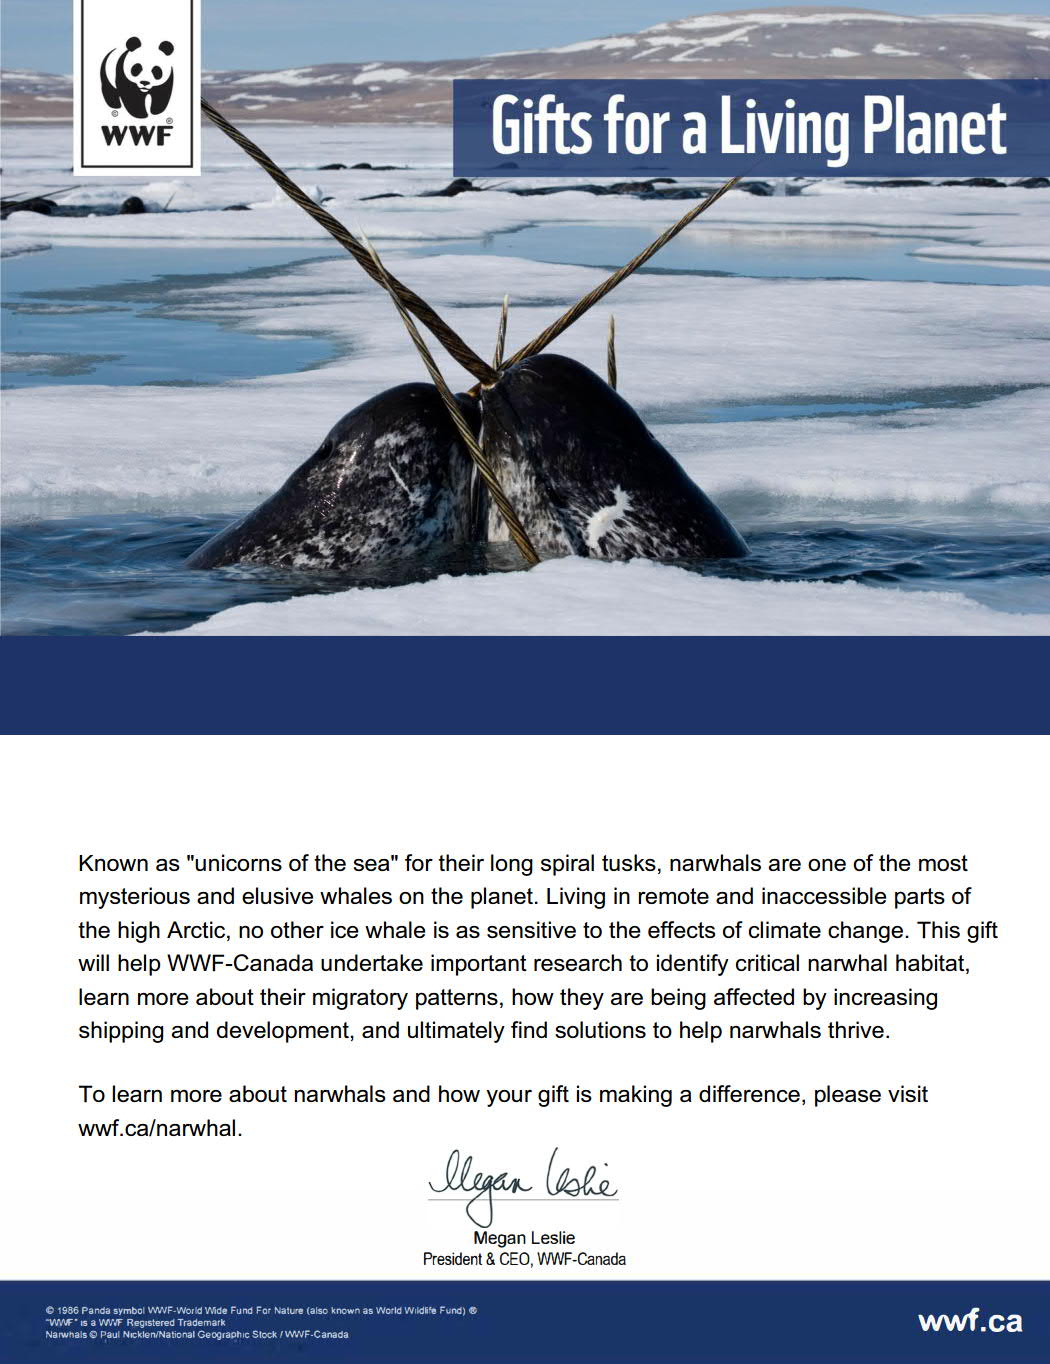 protect the narwhal’s icy home - WWF-Canada